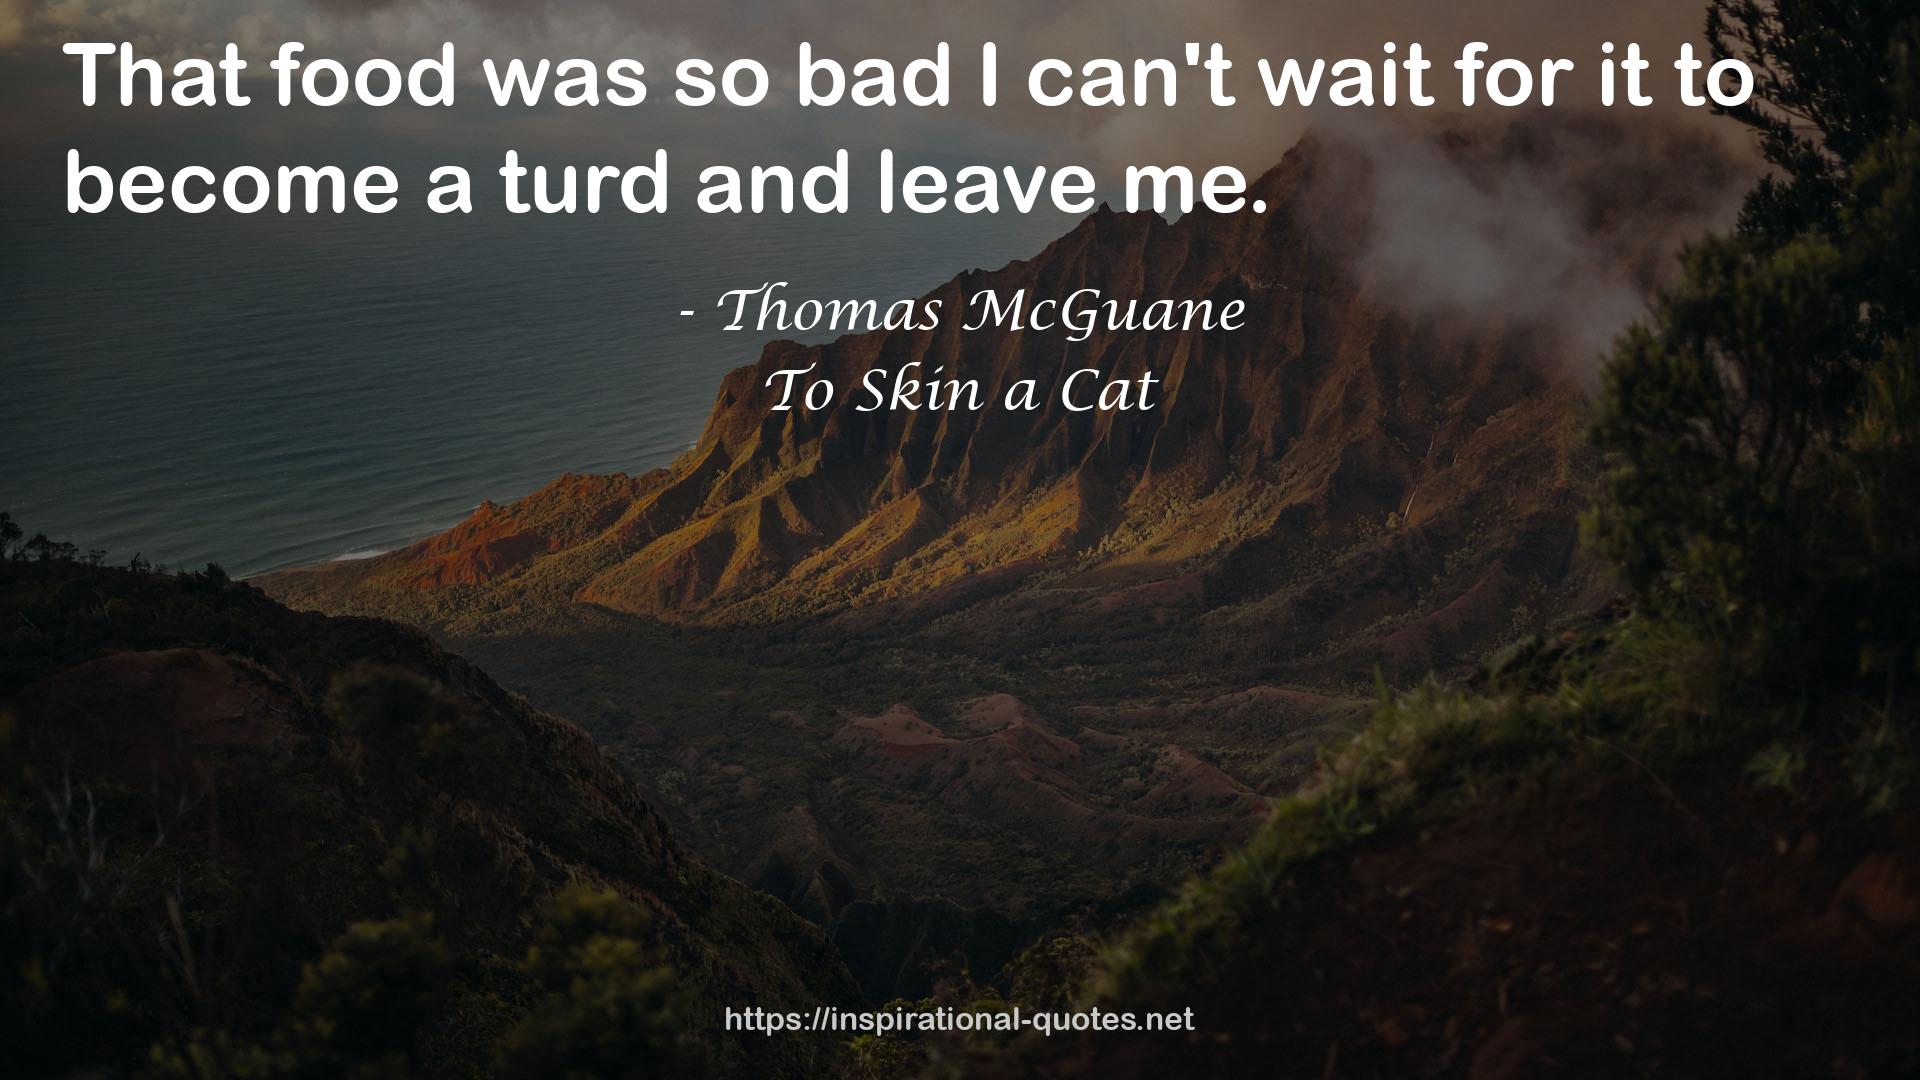 To Skin a Cat QUOTES